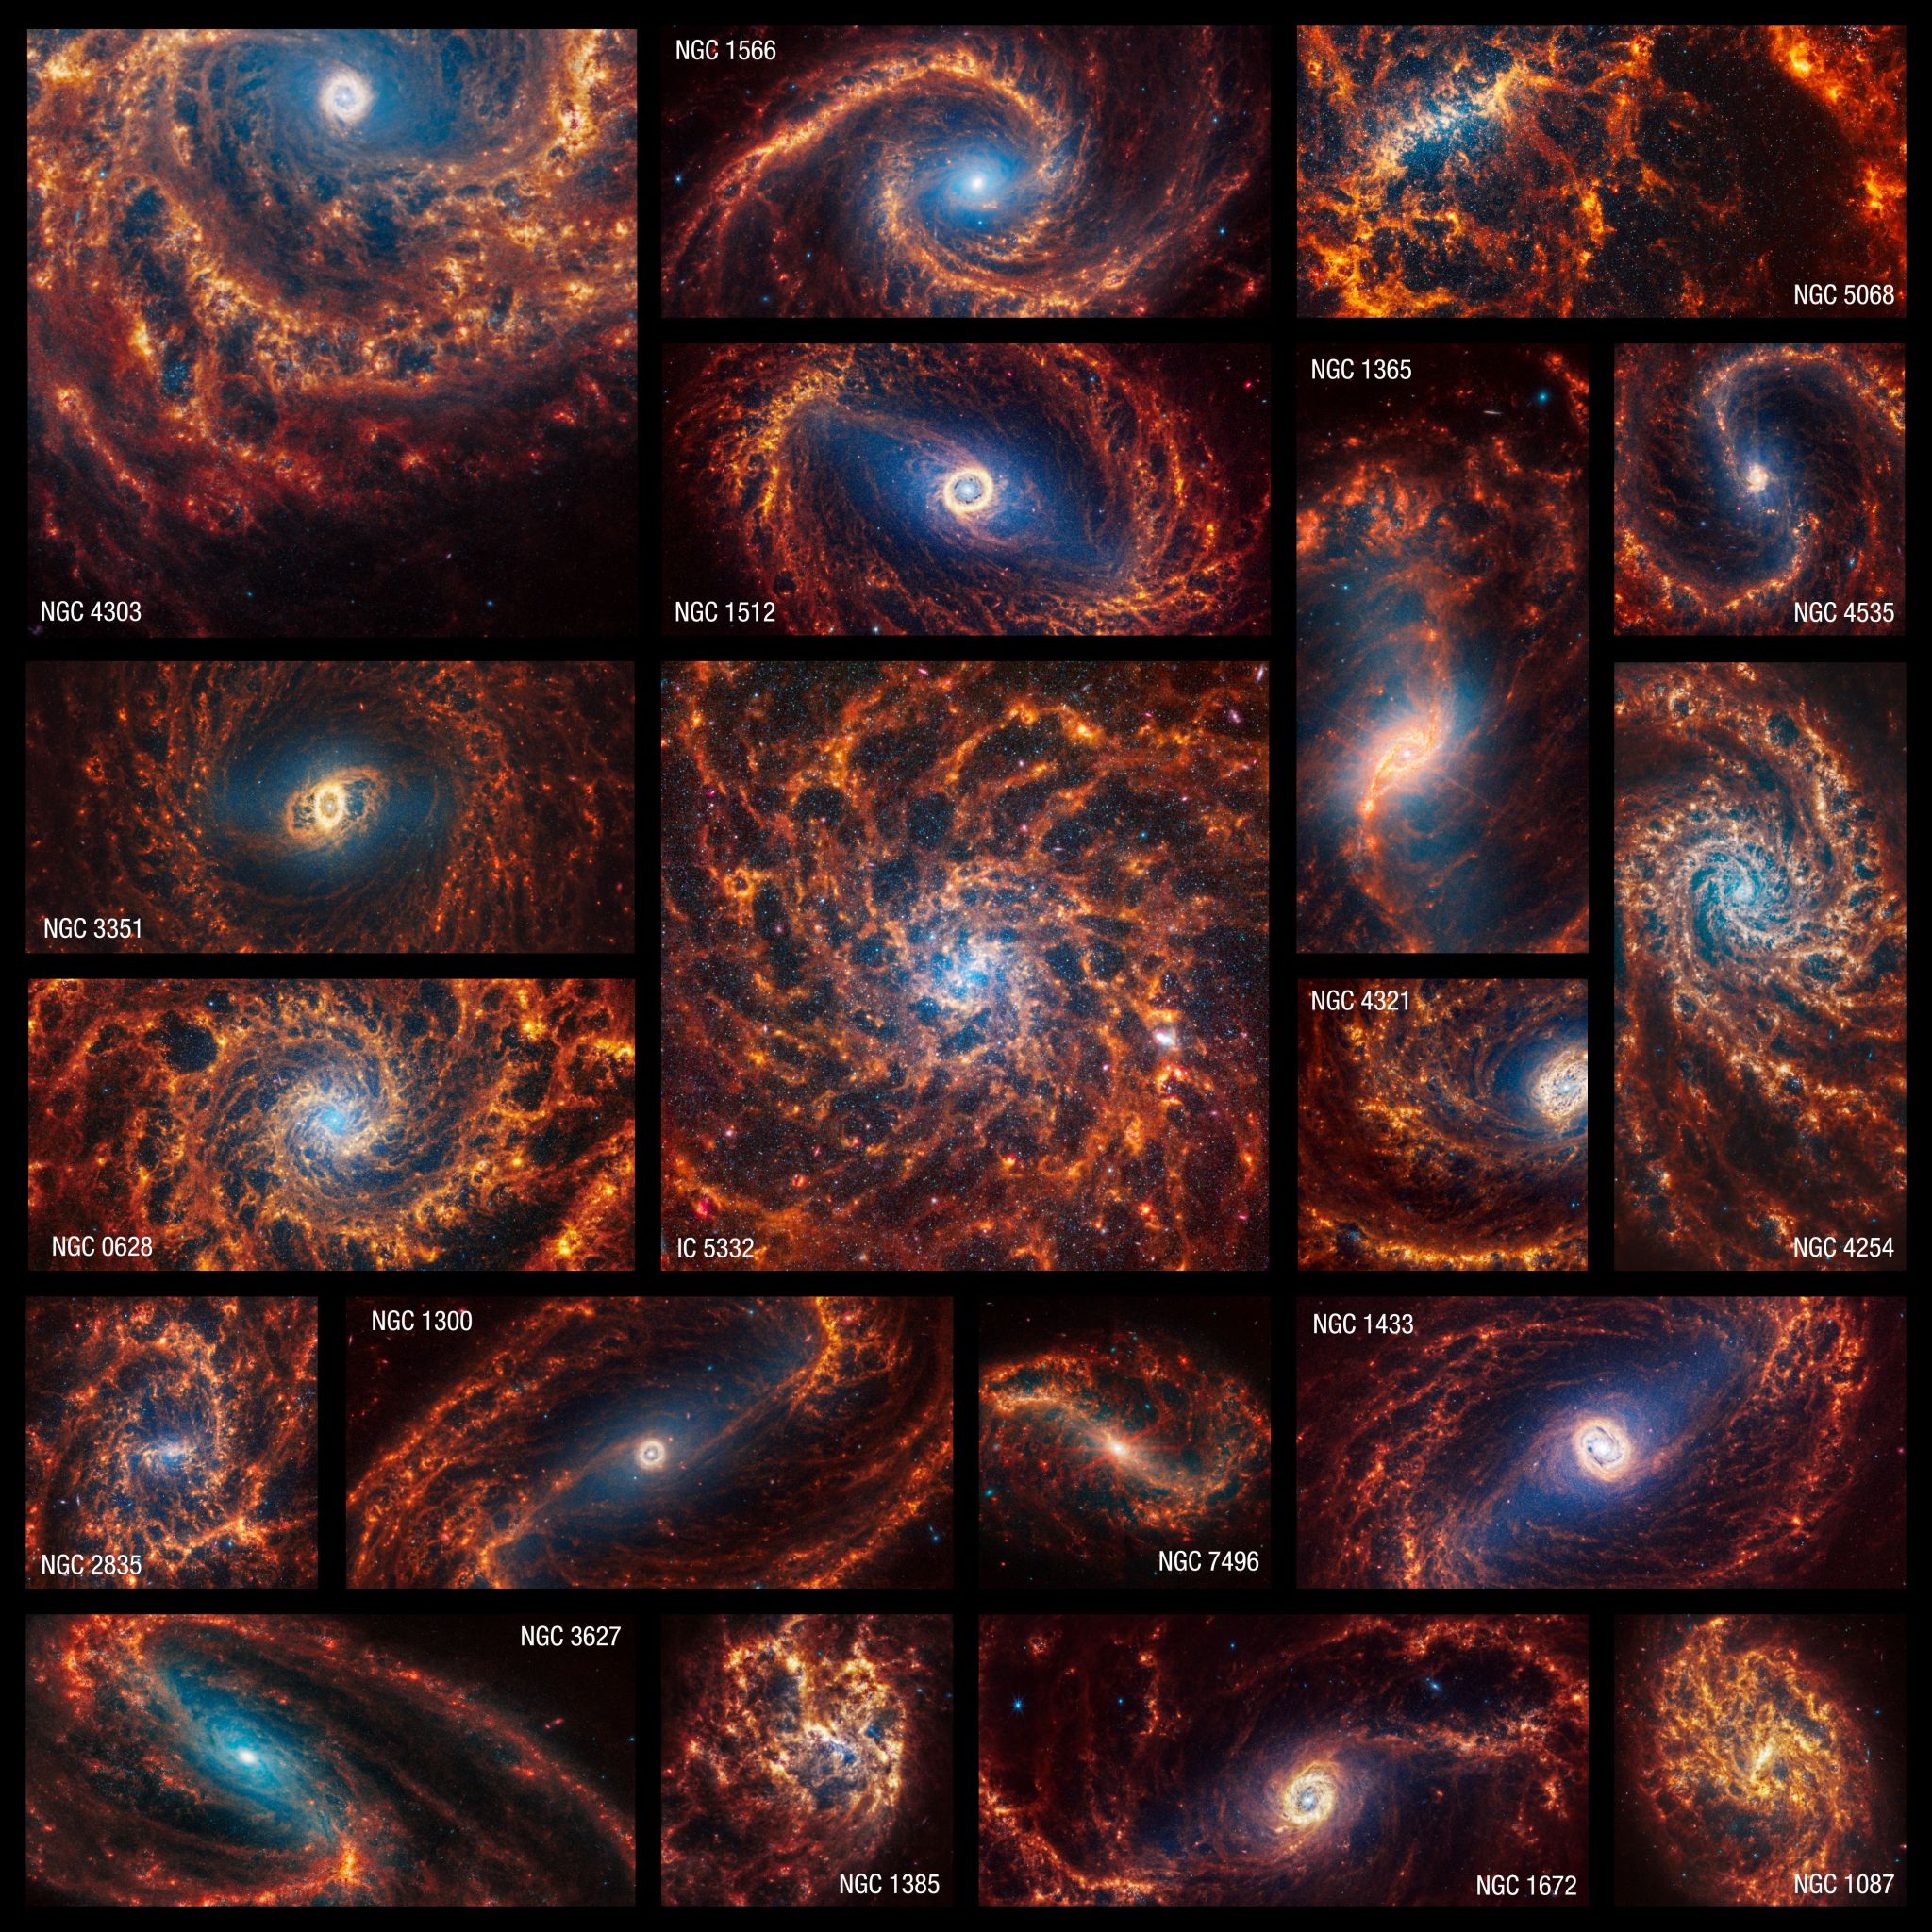 The James Webb Space Telescope observed 19 nearby face-on spiral galaxies in near- and mid-infrared light as part of its contributions to the Physics at High Angular resolution in Nearby GalaxieS, or PHANGS, program. PHANGS also includes images and data from NASA’s Hubble Space Telescope, the Very Large Telescope’s Multi-Unit Spectroscopic Explorer, and the Atacama Large Millimeter/submillimeter Array, which included observations taken in ultraviolet, visible, and radio light.